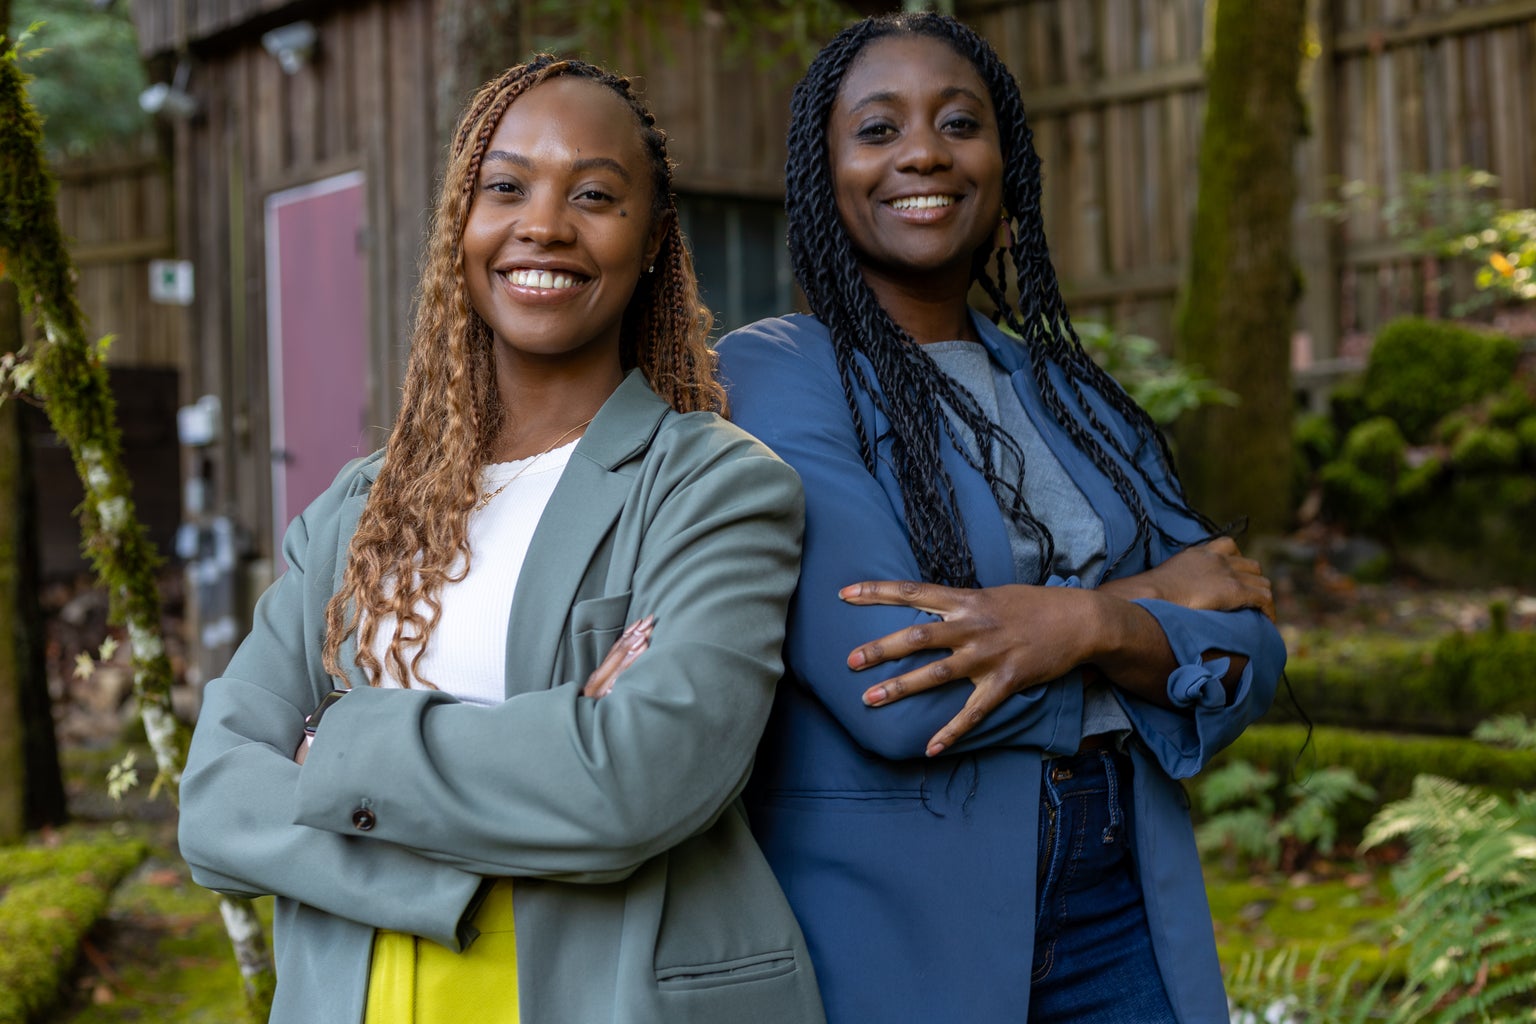 erika hairston and arnelle arnsong, founders of edlyft